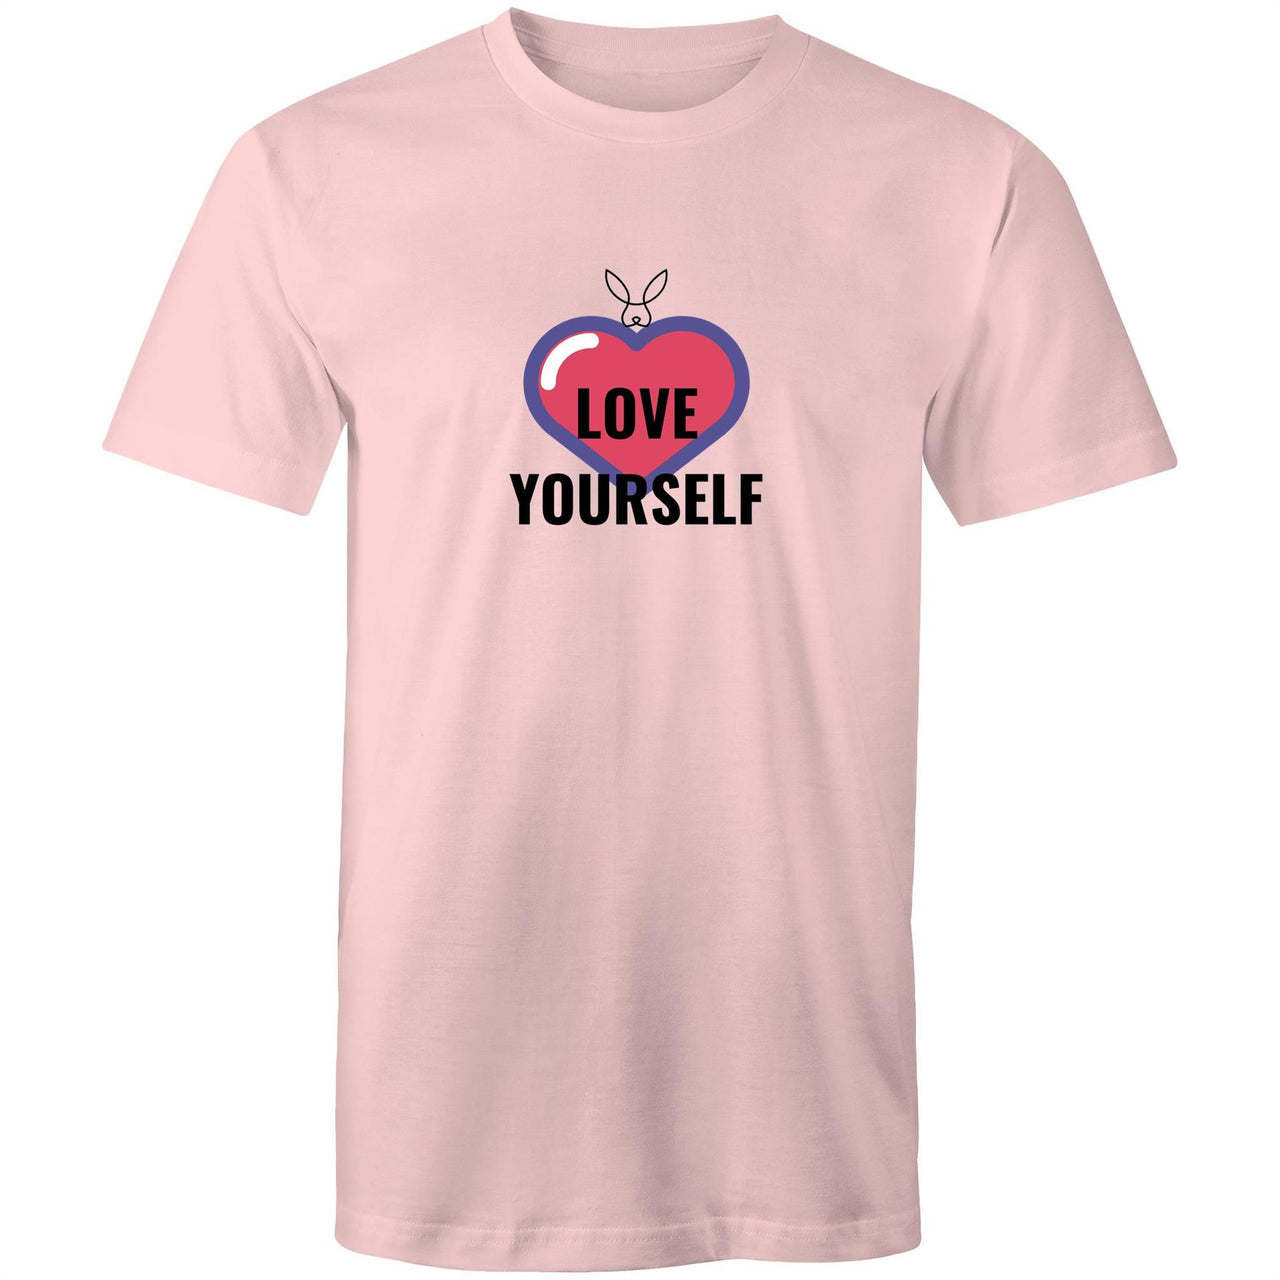 Love Yourself Crew T-Shirt by CBF Clothing Pink